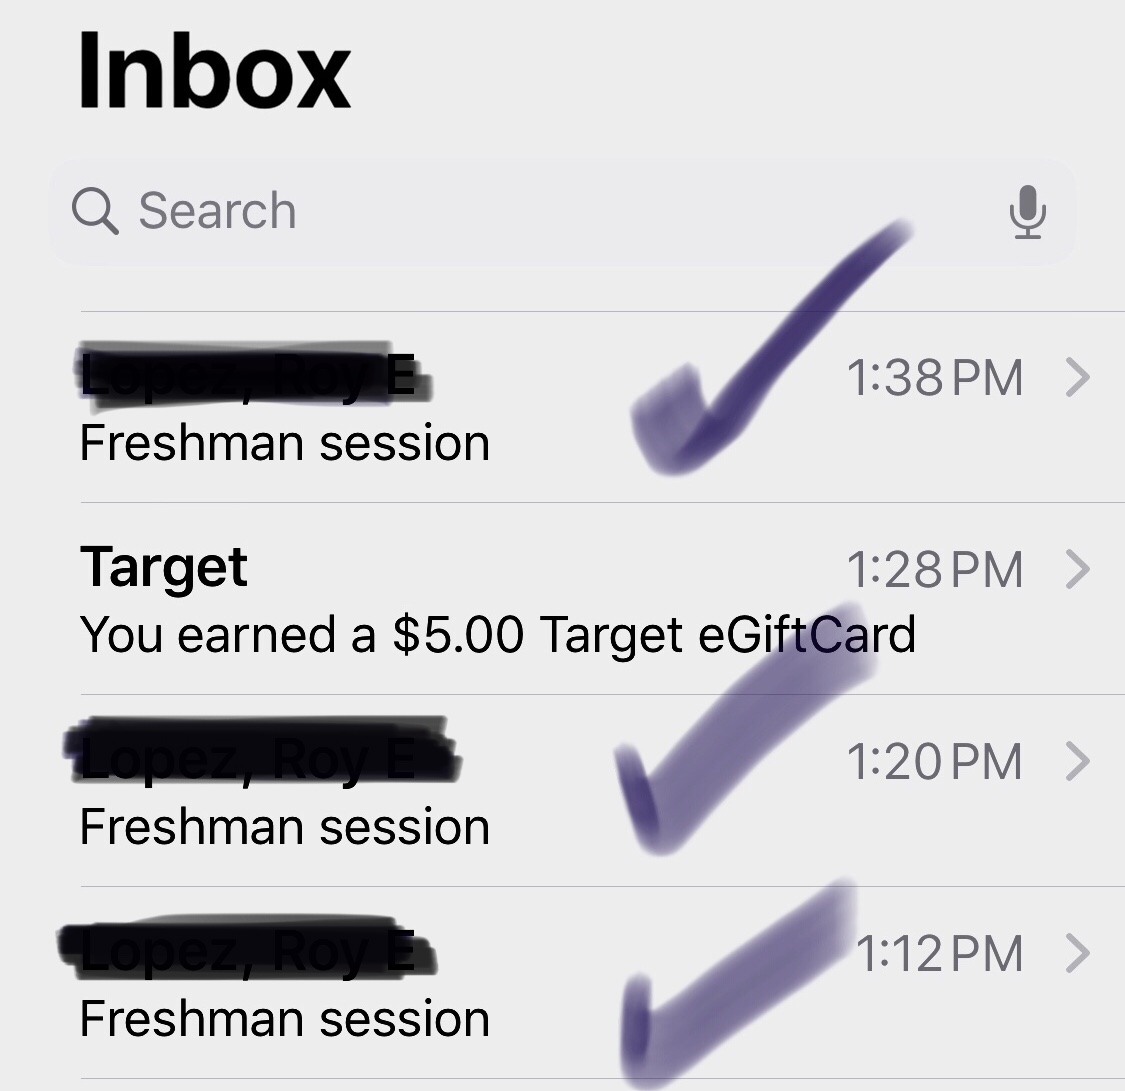 Freshman session email-1